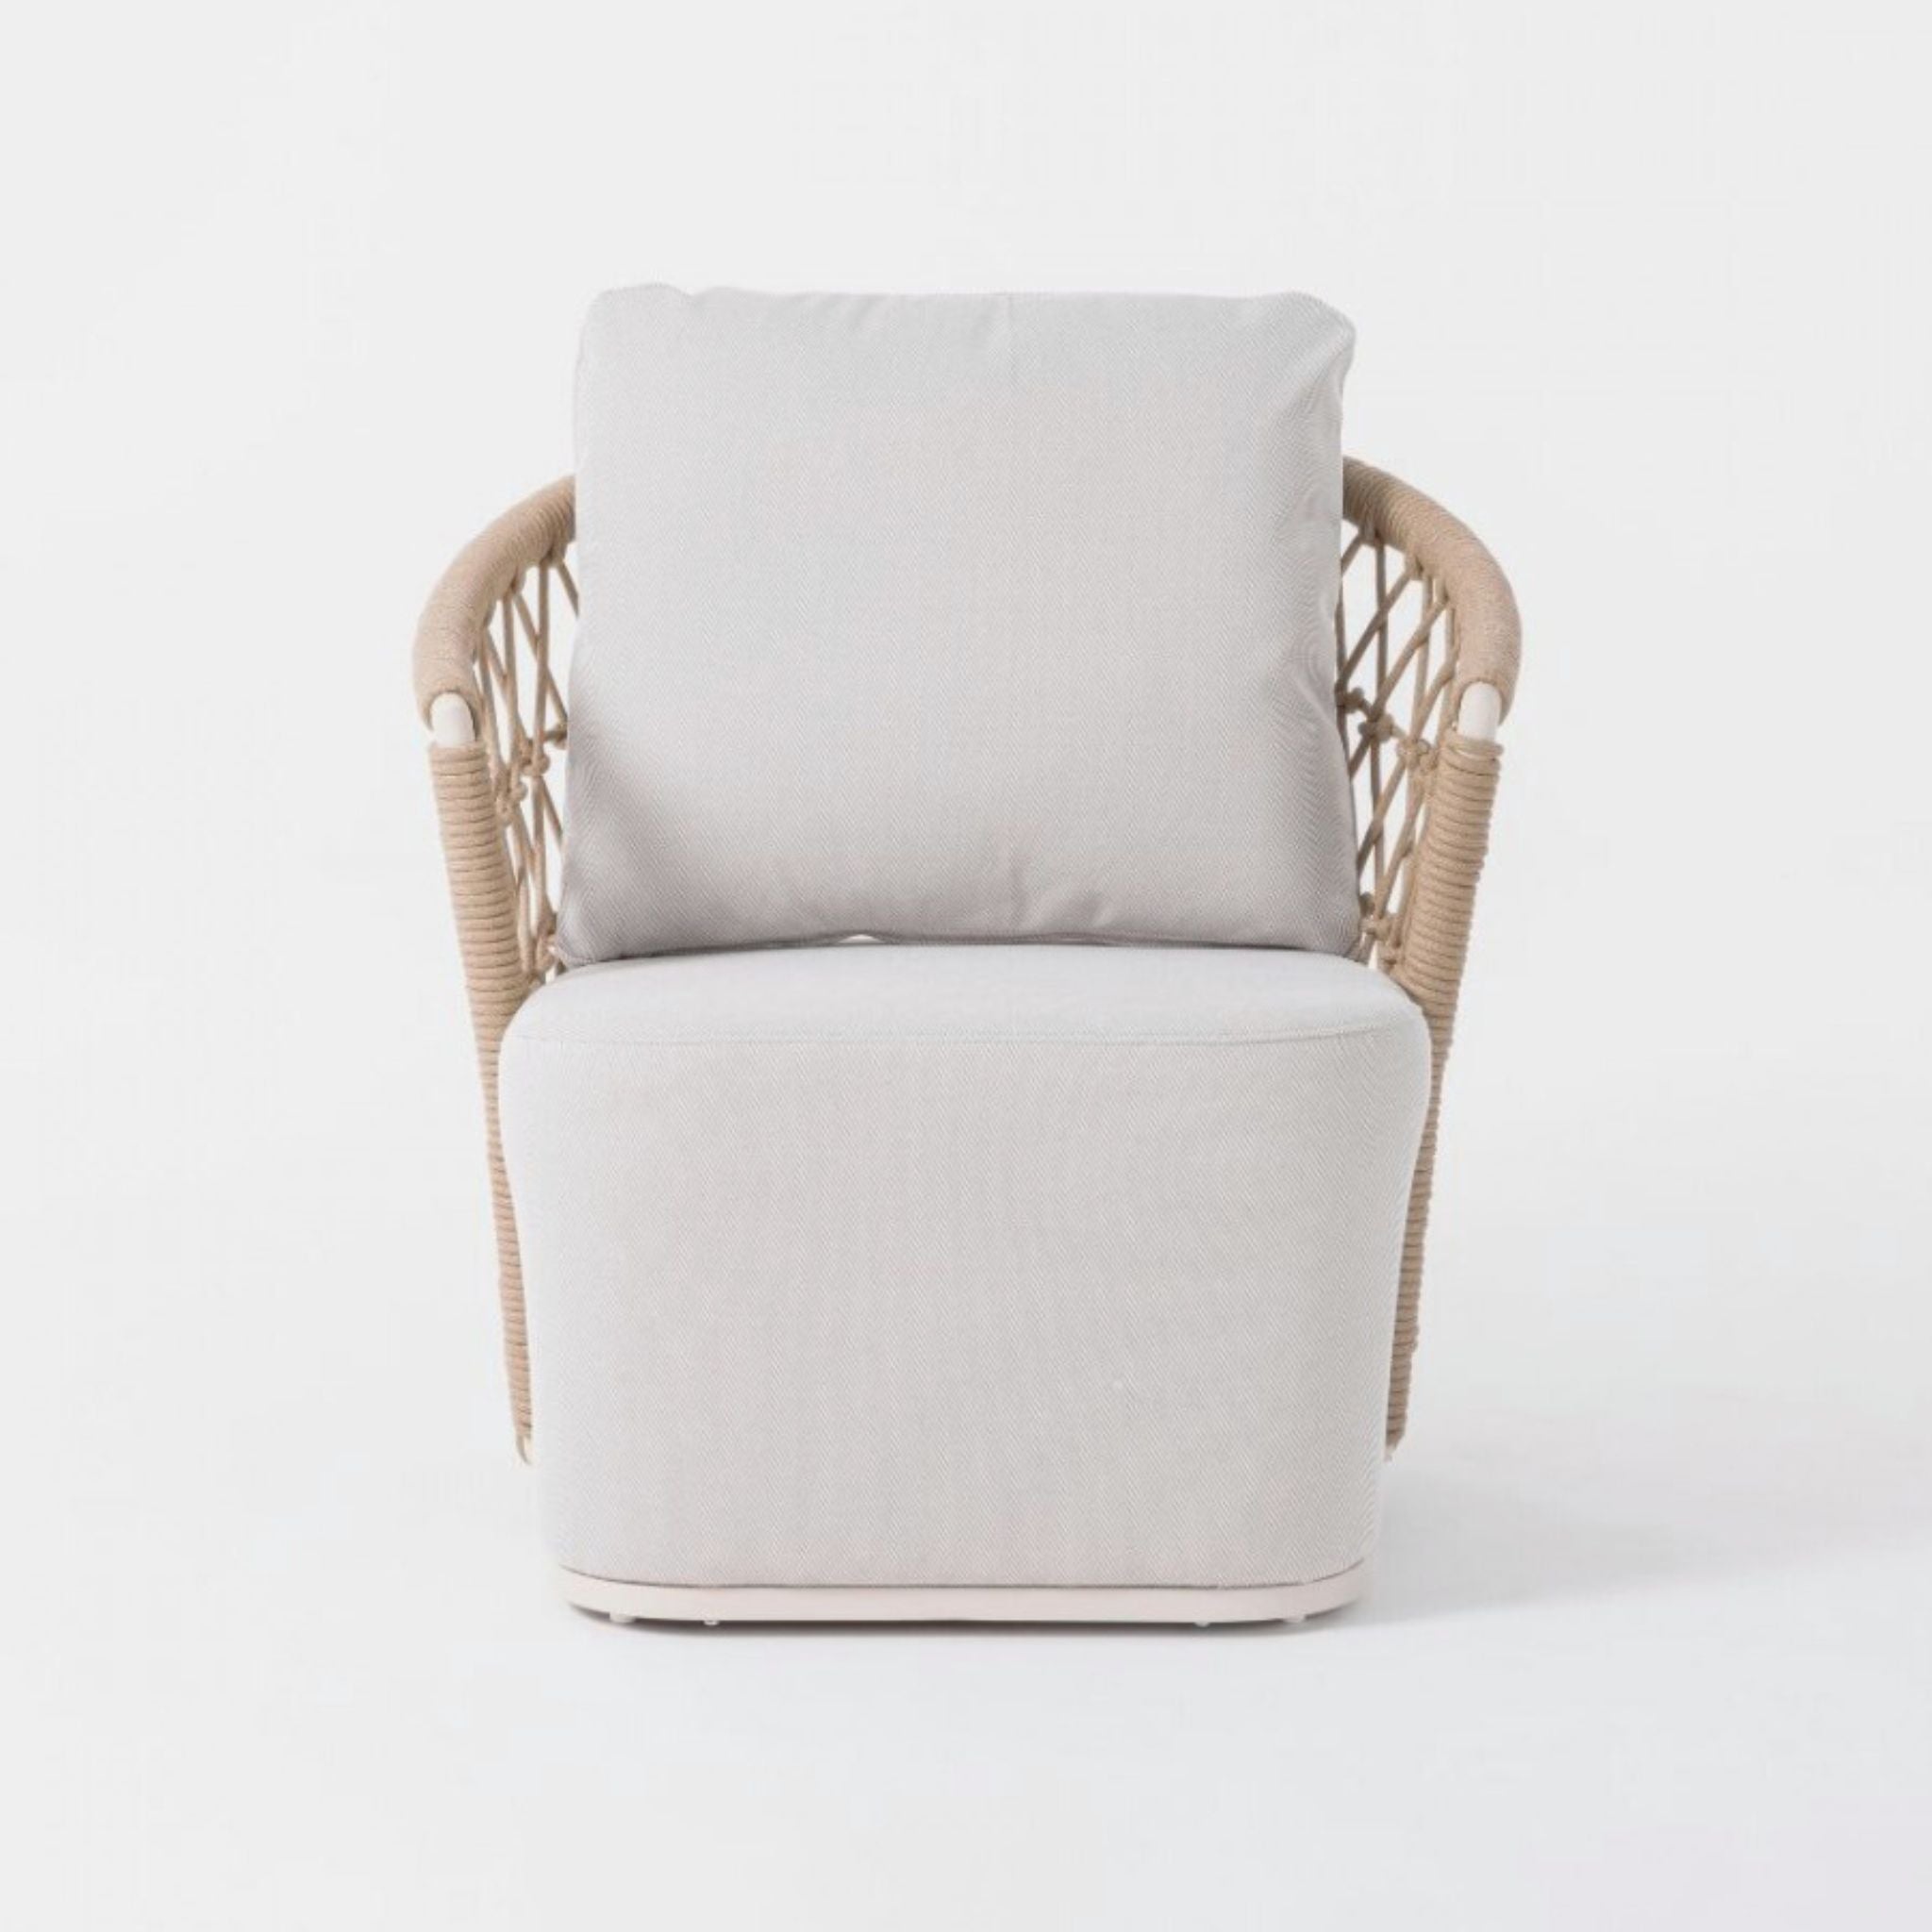 Crisal Decoracion Isquia Armchair with Red Backrest Rope and Aluminum - ModernistaLiving